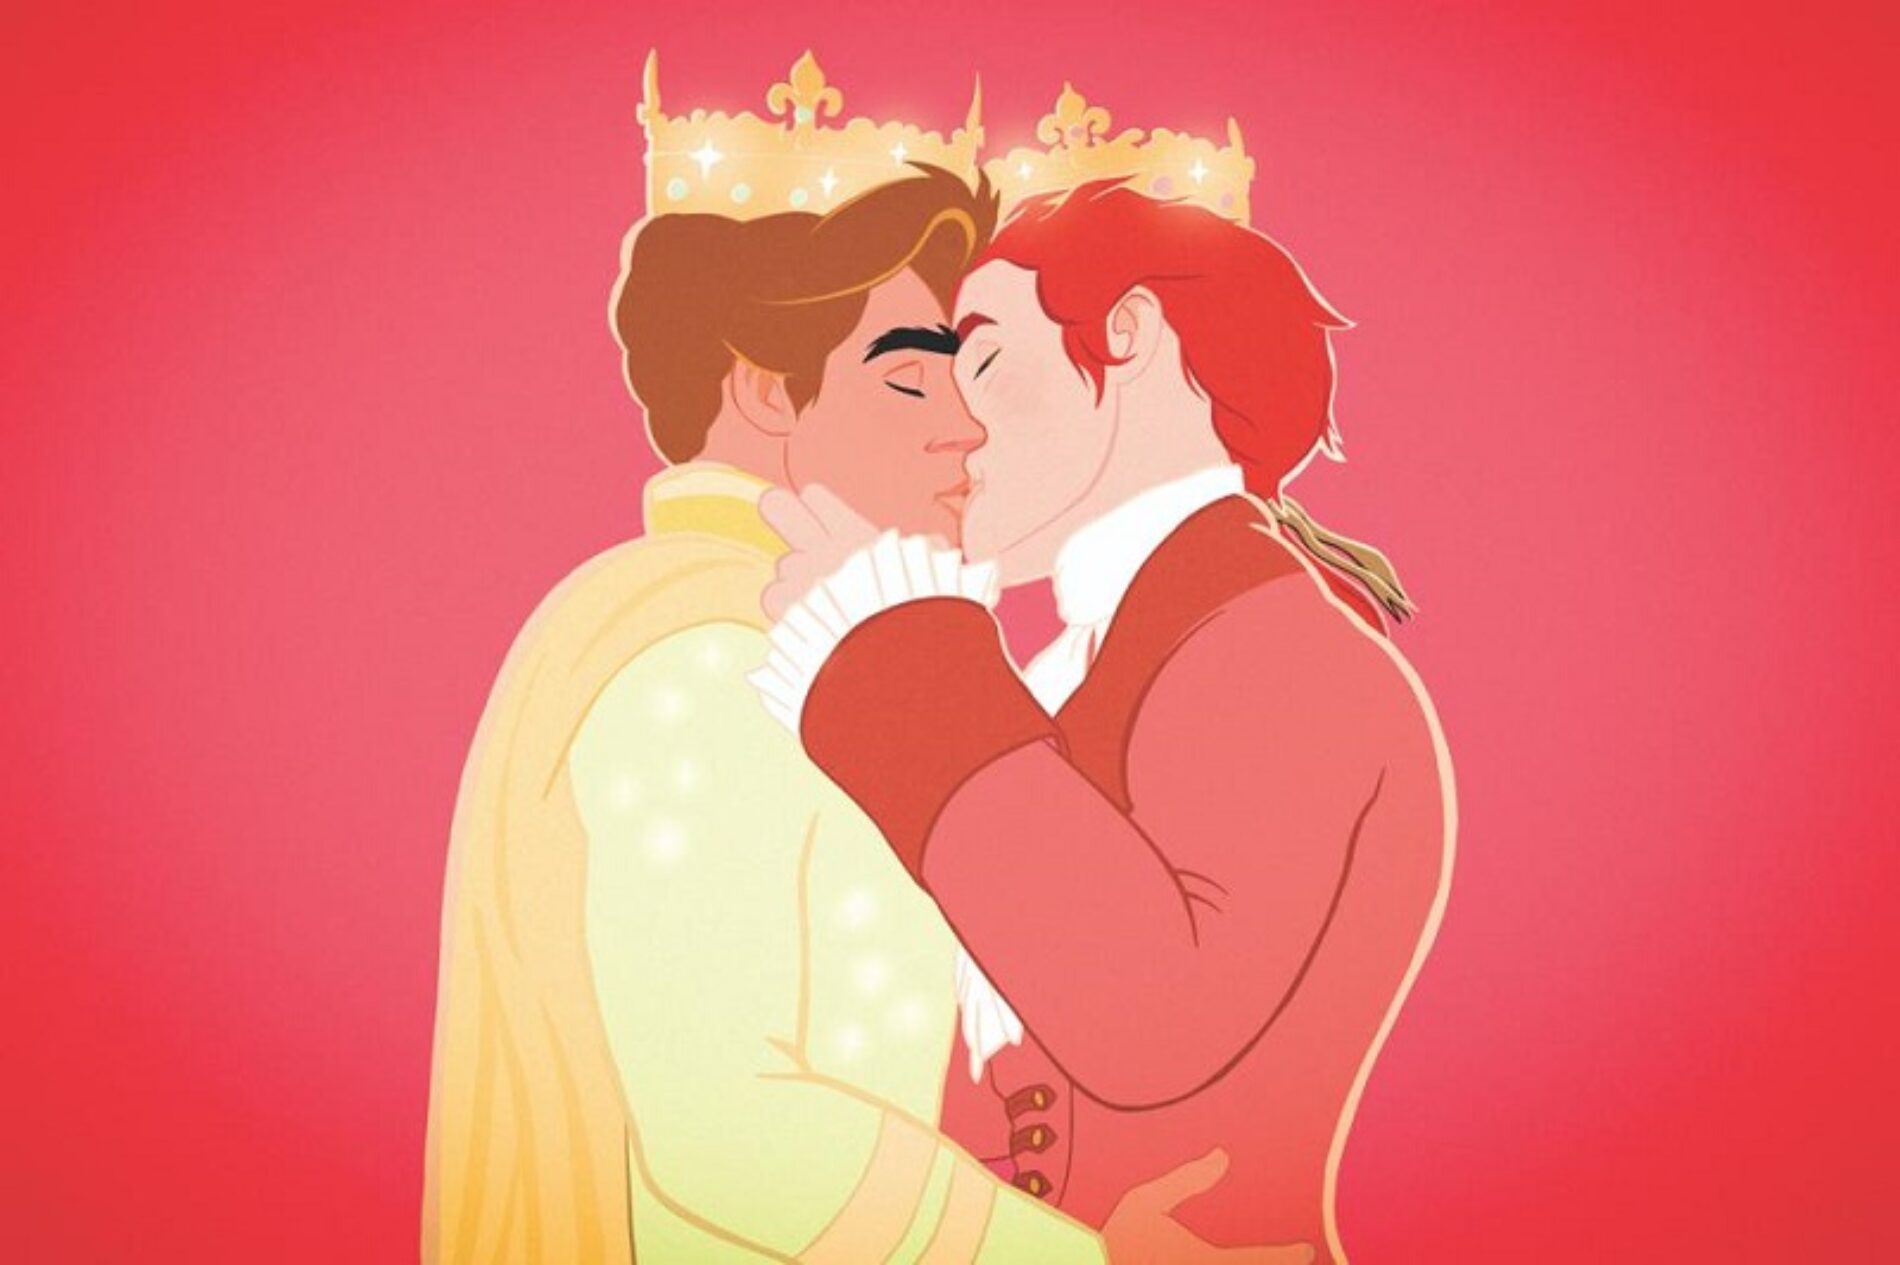 About The Gay Fairytale That Has Been Lost For 200 Years